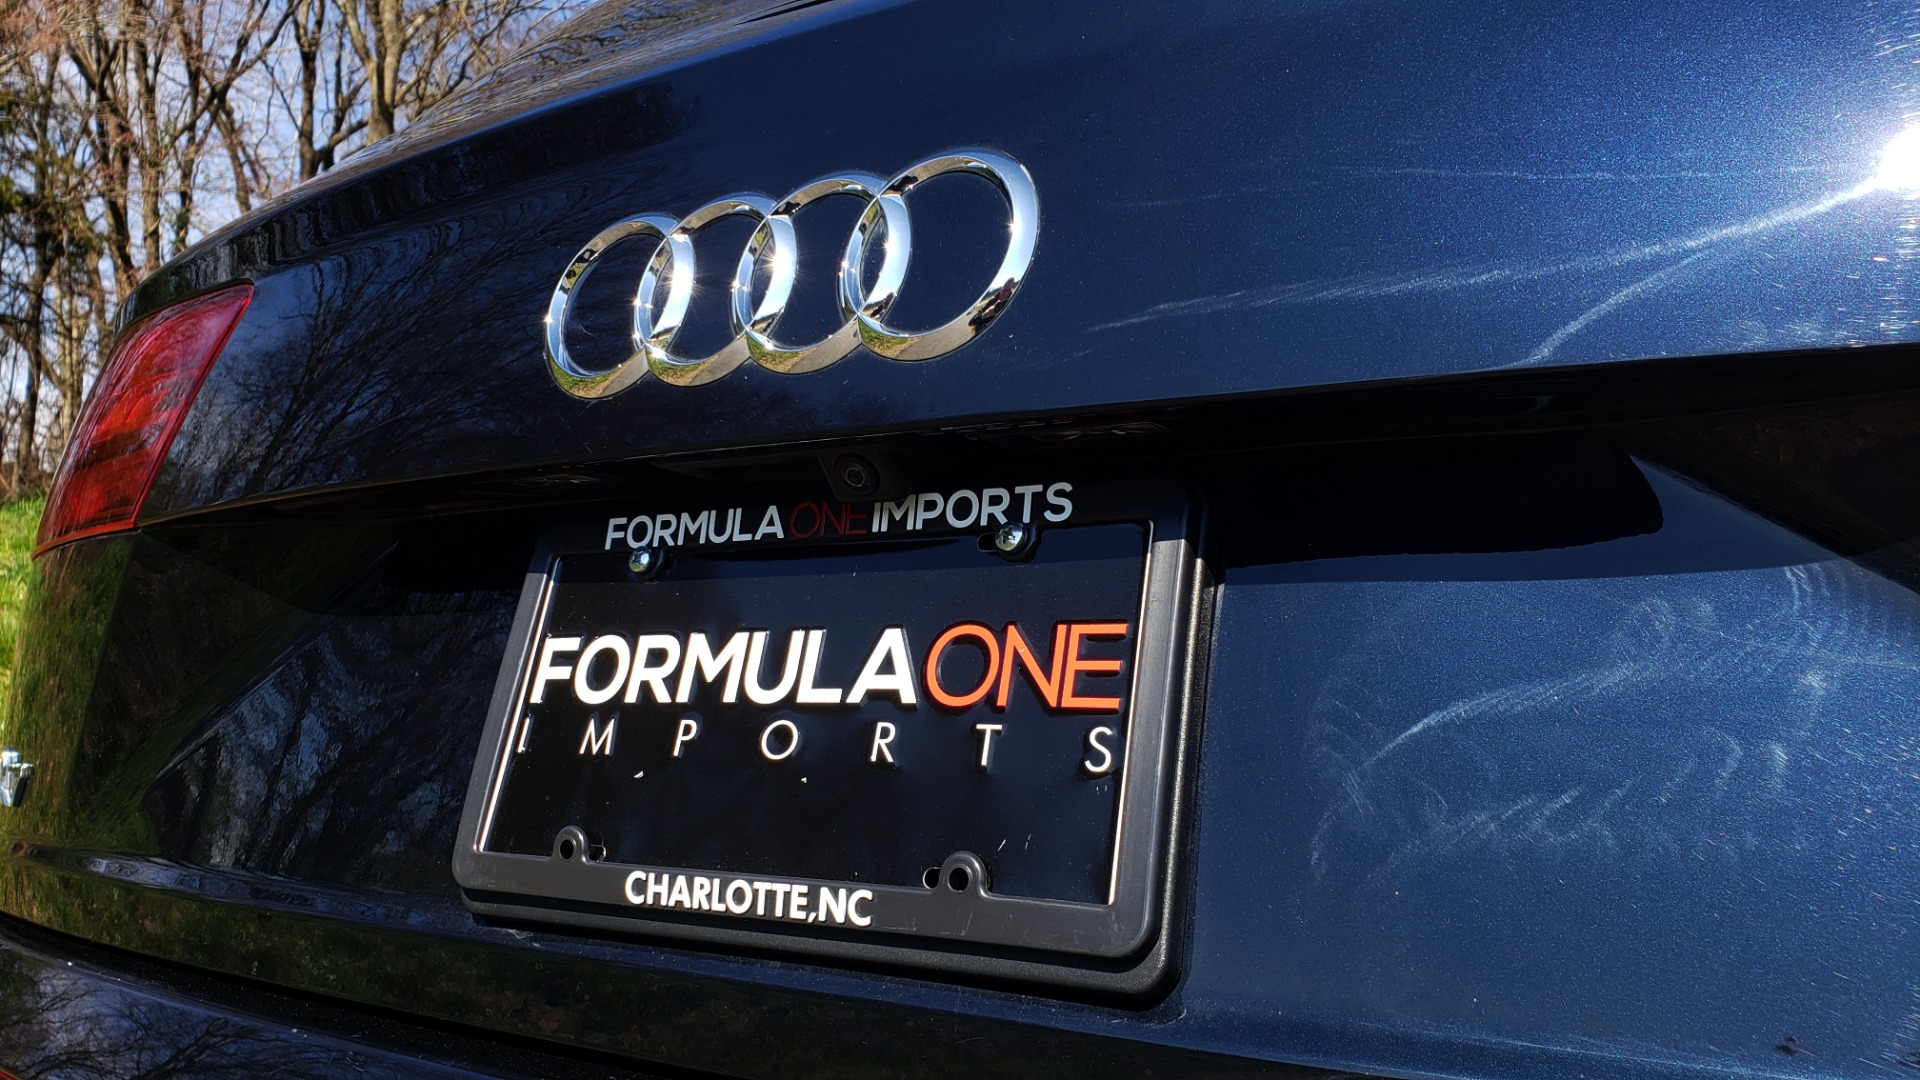 Used 2018 Audi Q7 PRESTIGE 3.0T CLD WTHR / NAV / BOSE / HEADS-UP / REARVIEW for sale Sold at Formula Imports in Charlotte NC 28227 32